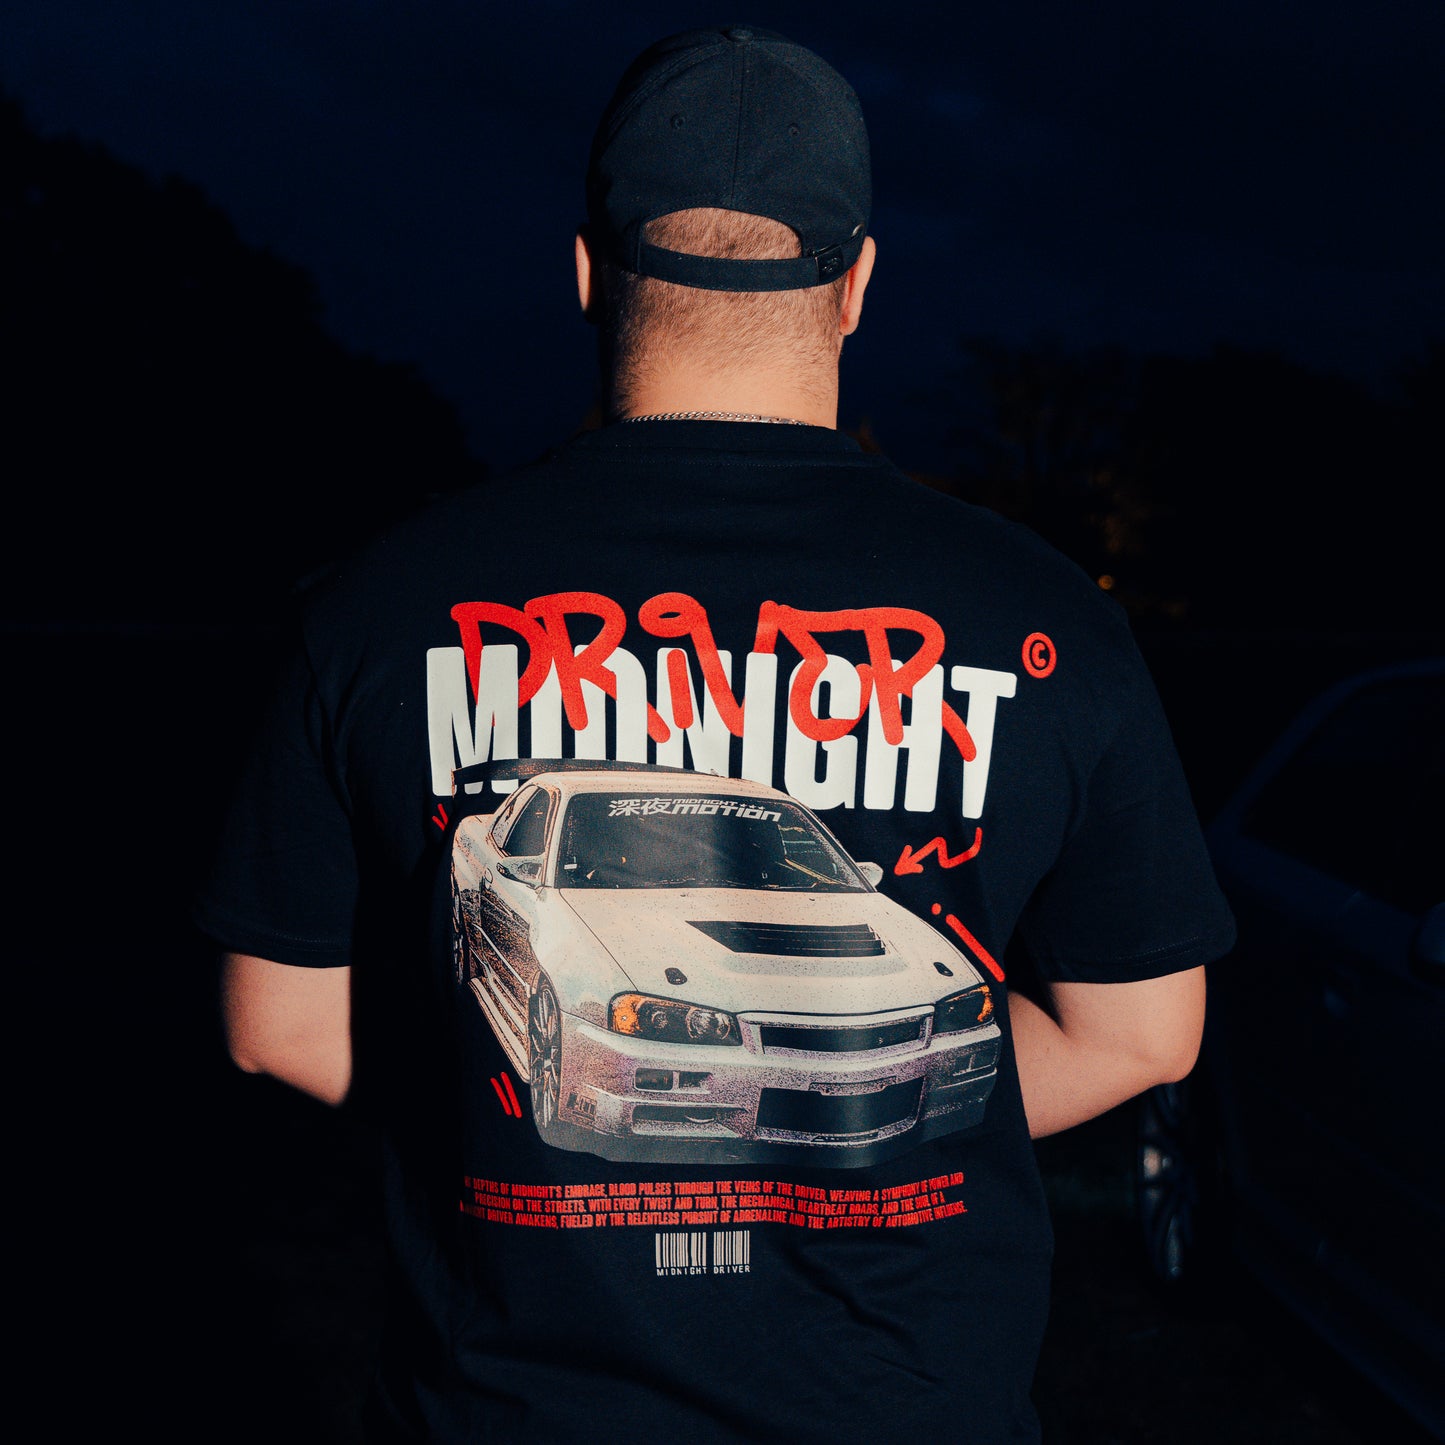 Midnight Driver Limited Tee